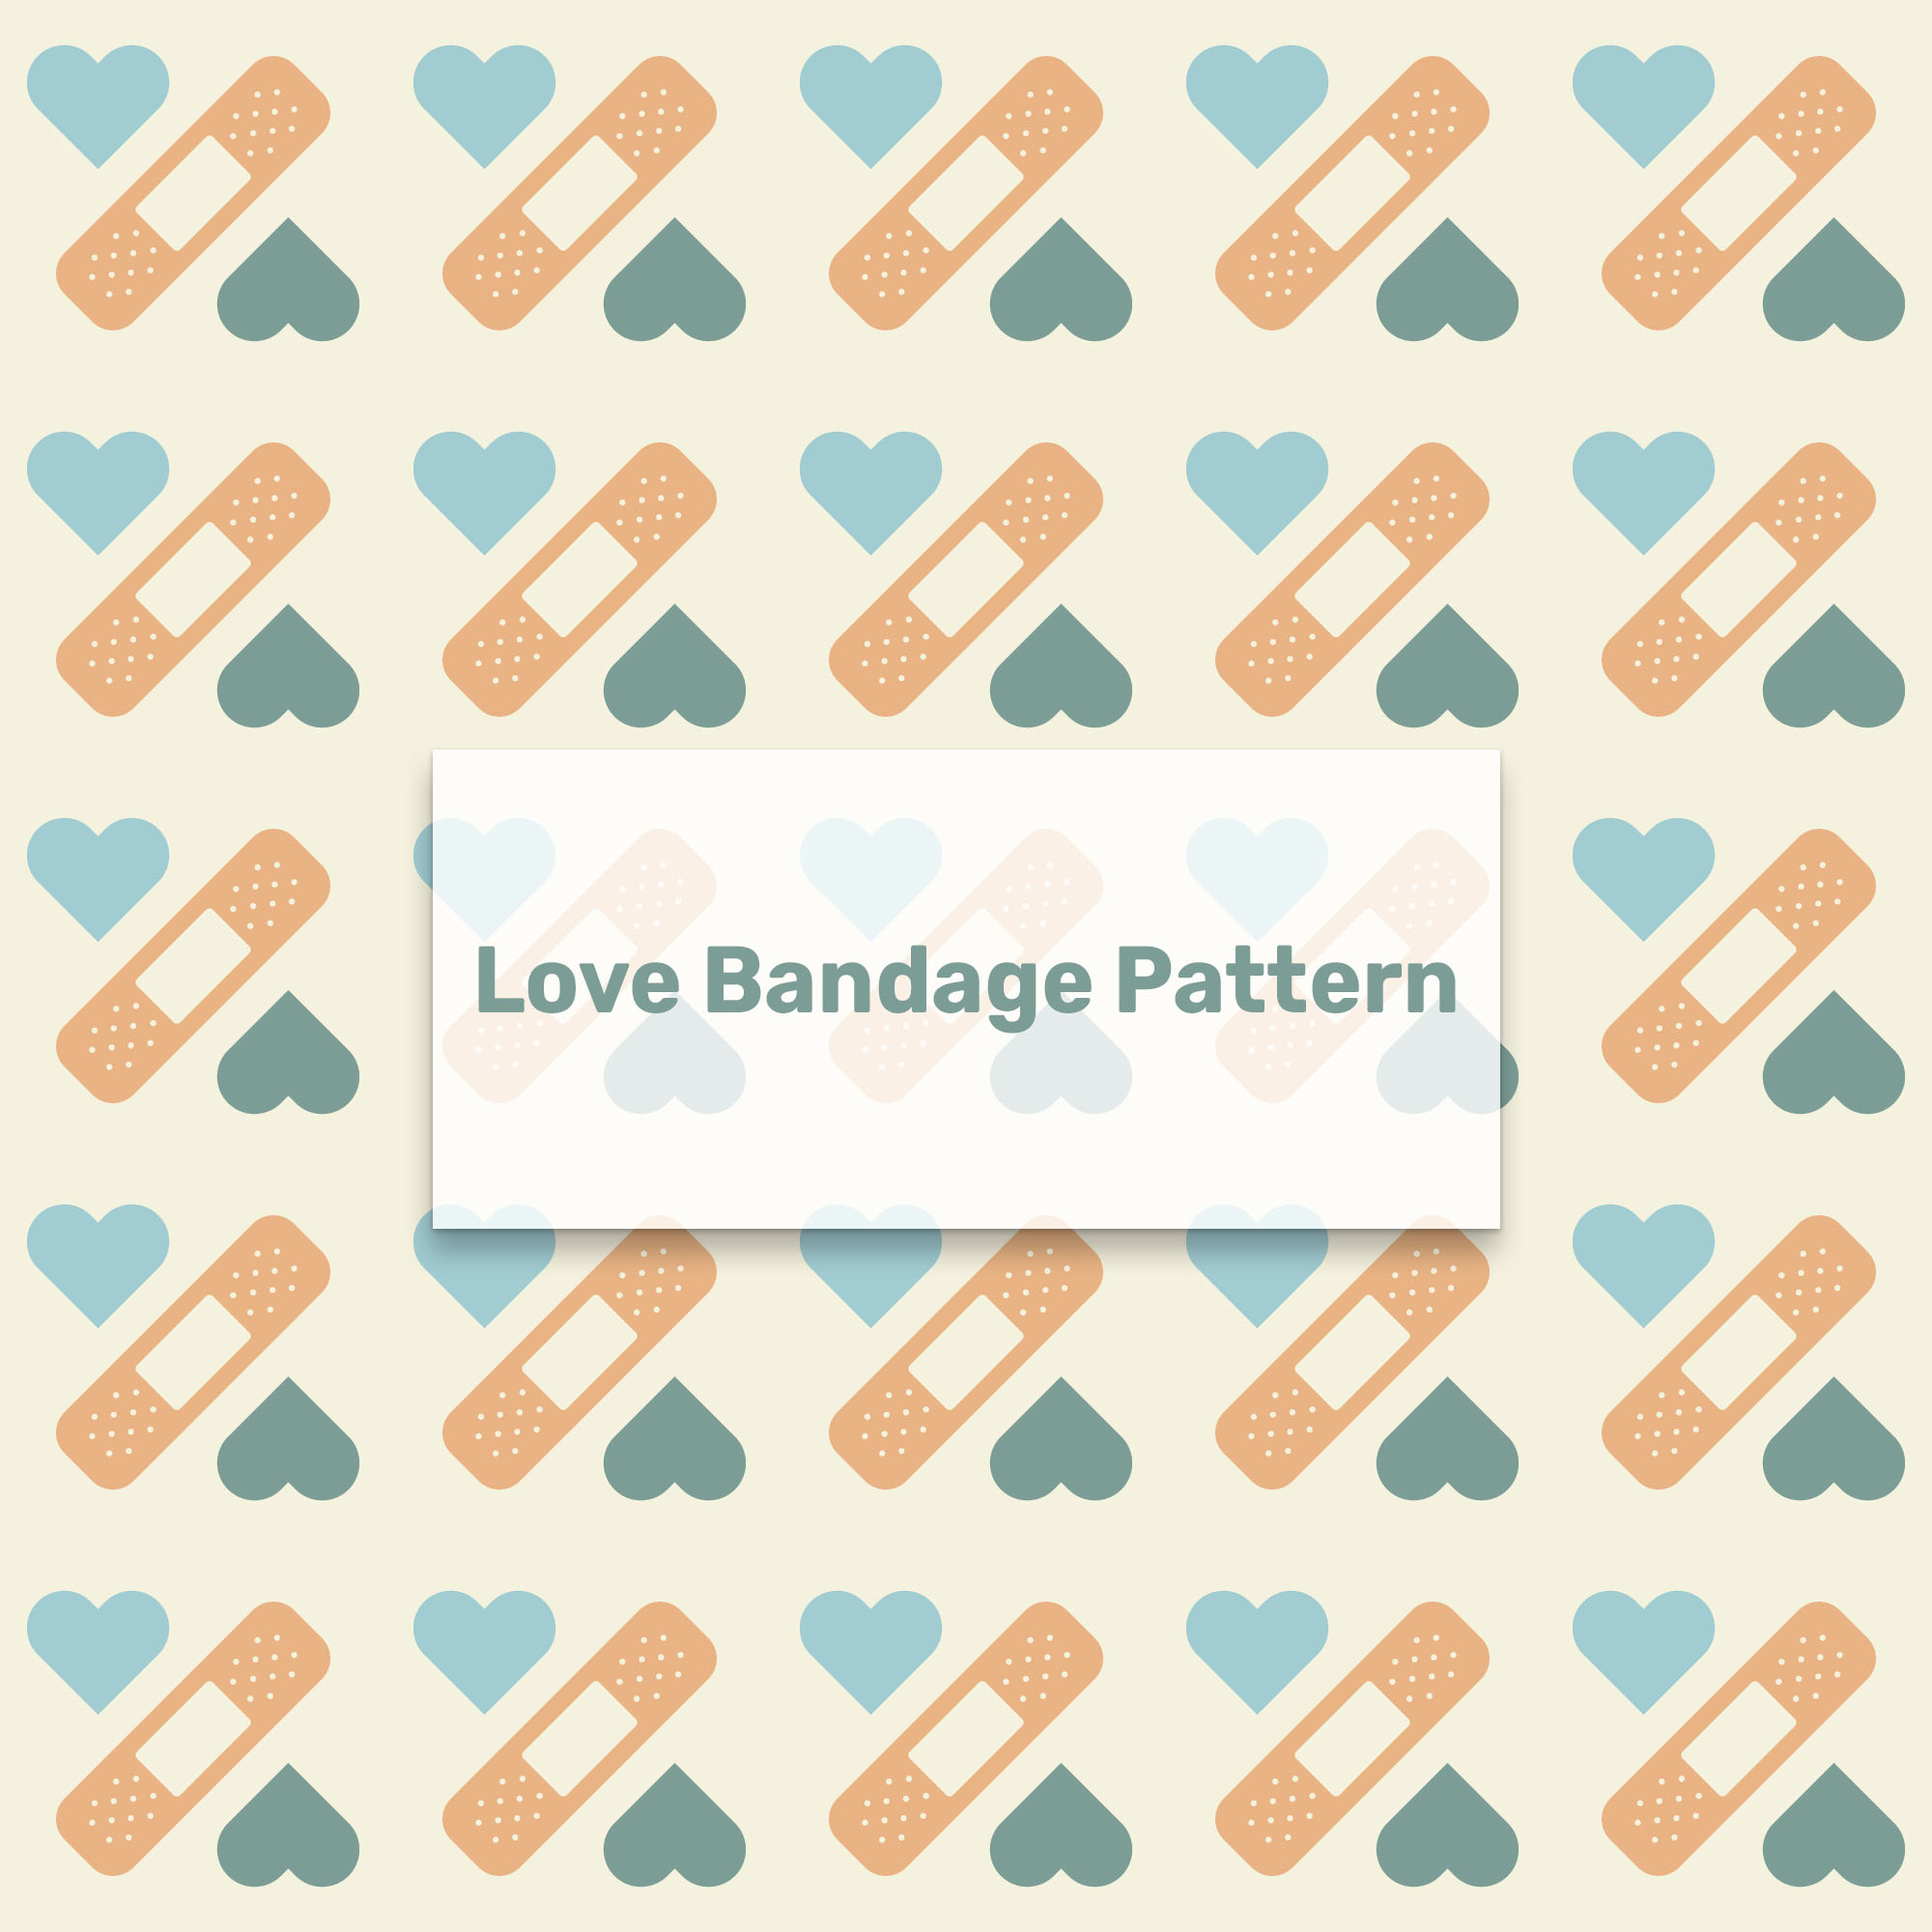 love bandage pattern design with flat minimal style can be use for web and print products cover image.